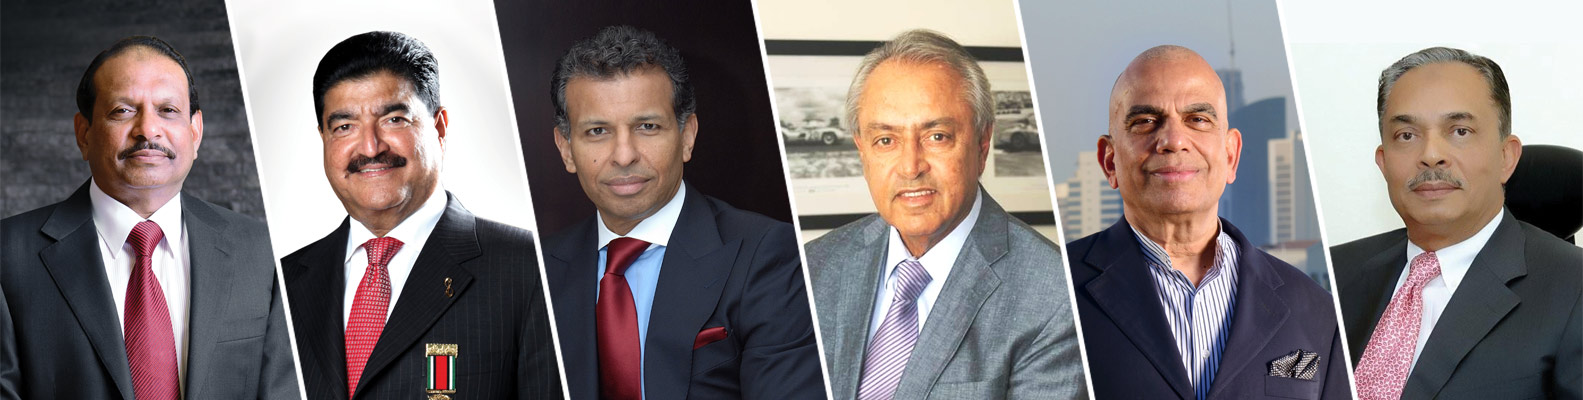 Top Indian leaders in the Arab World 2014: Top Owners